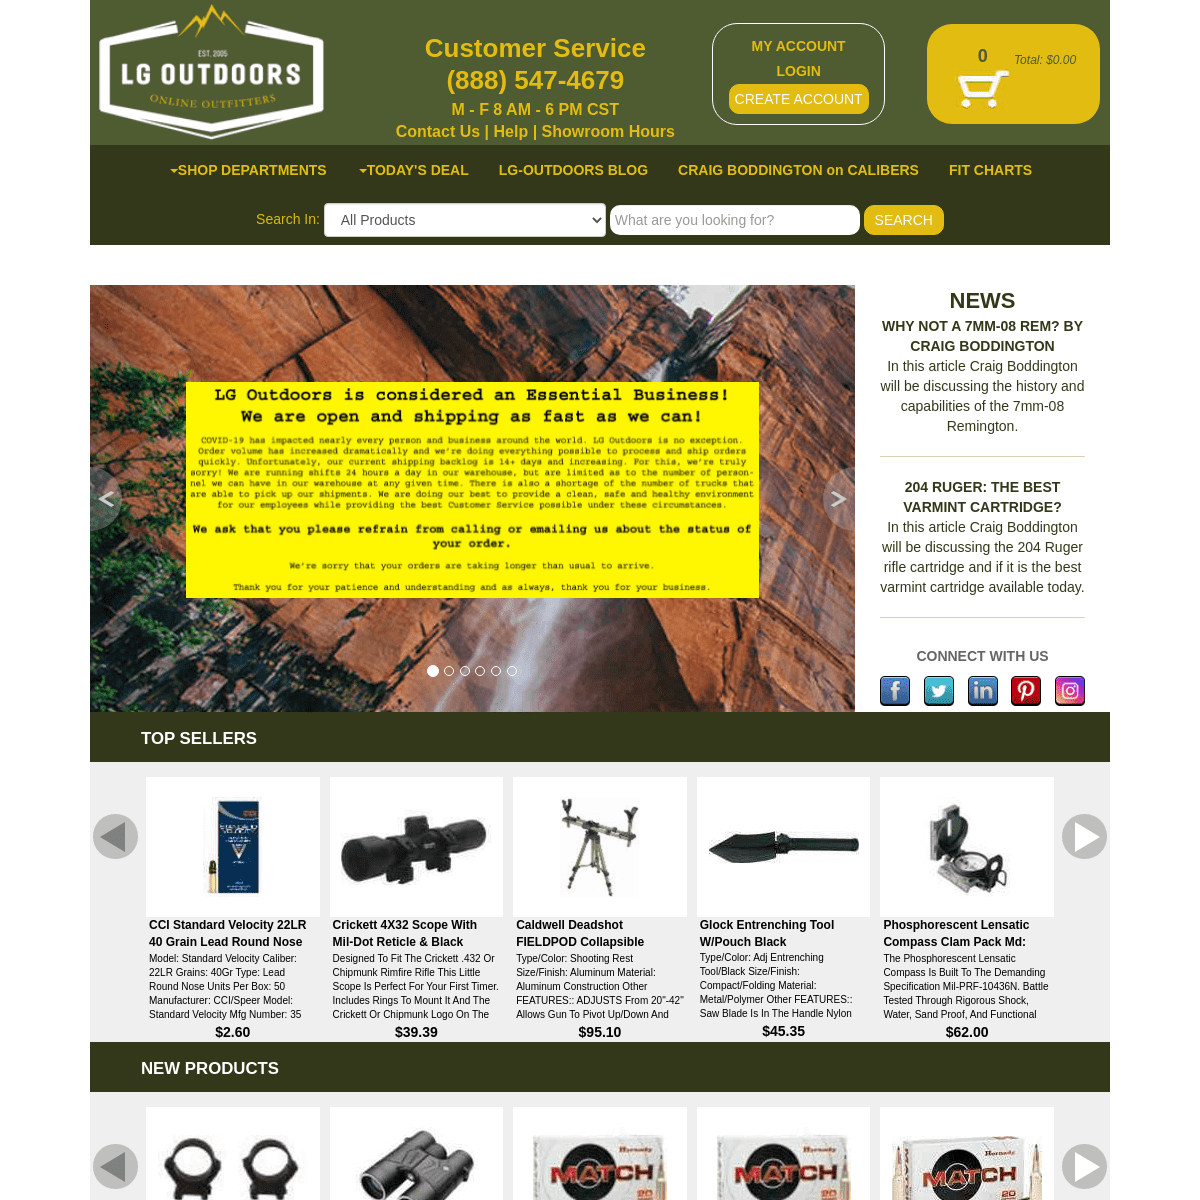 A complete backup of https://lg-outdoors.com